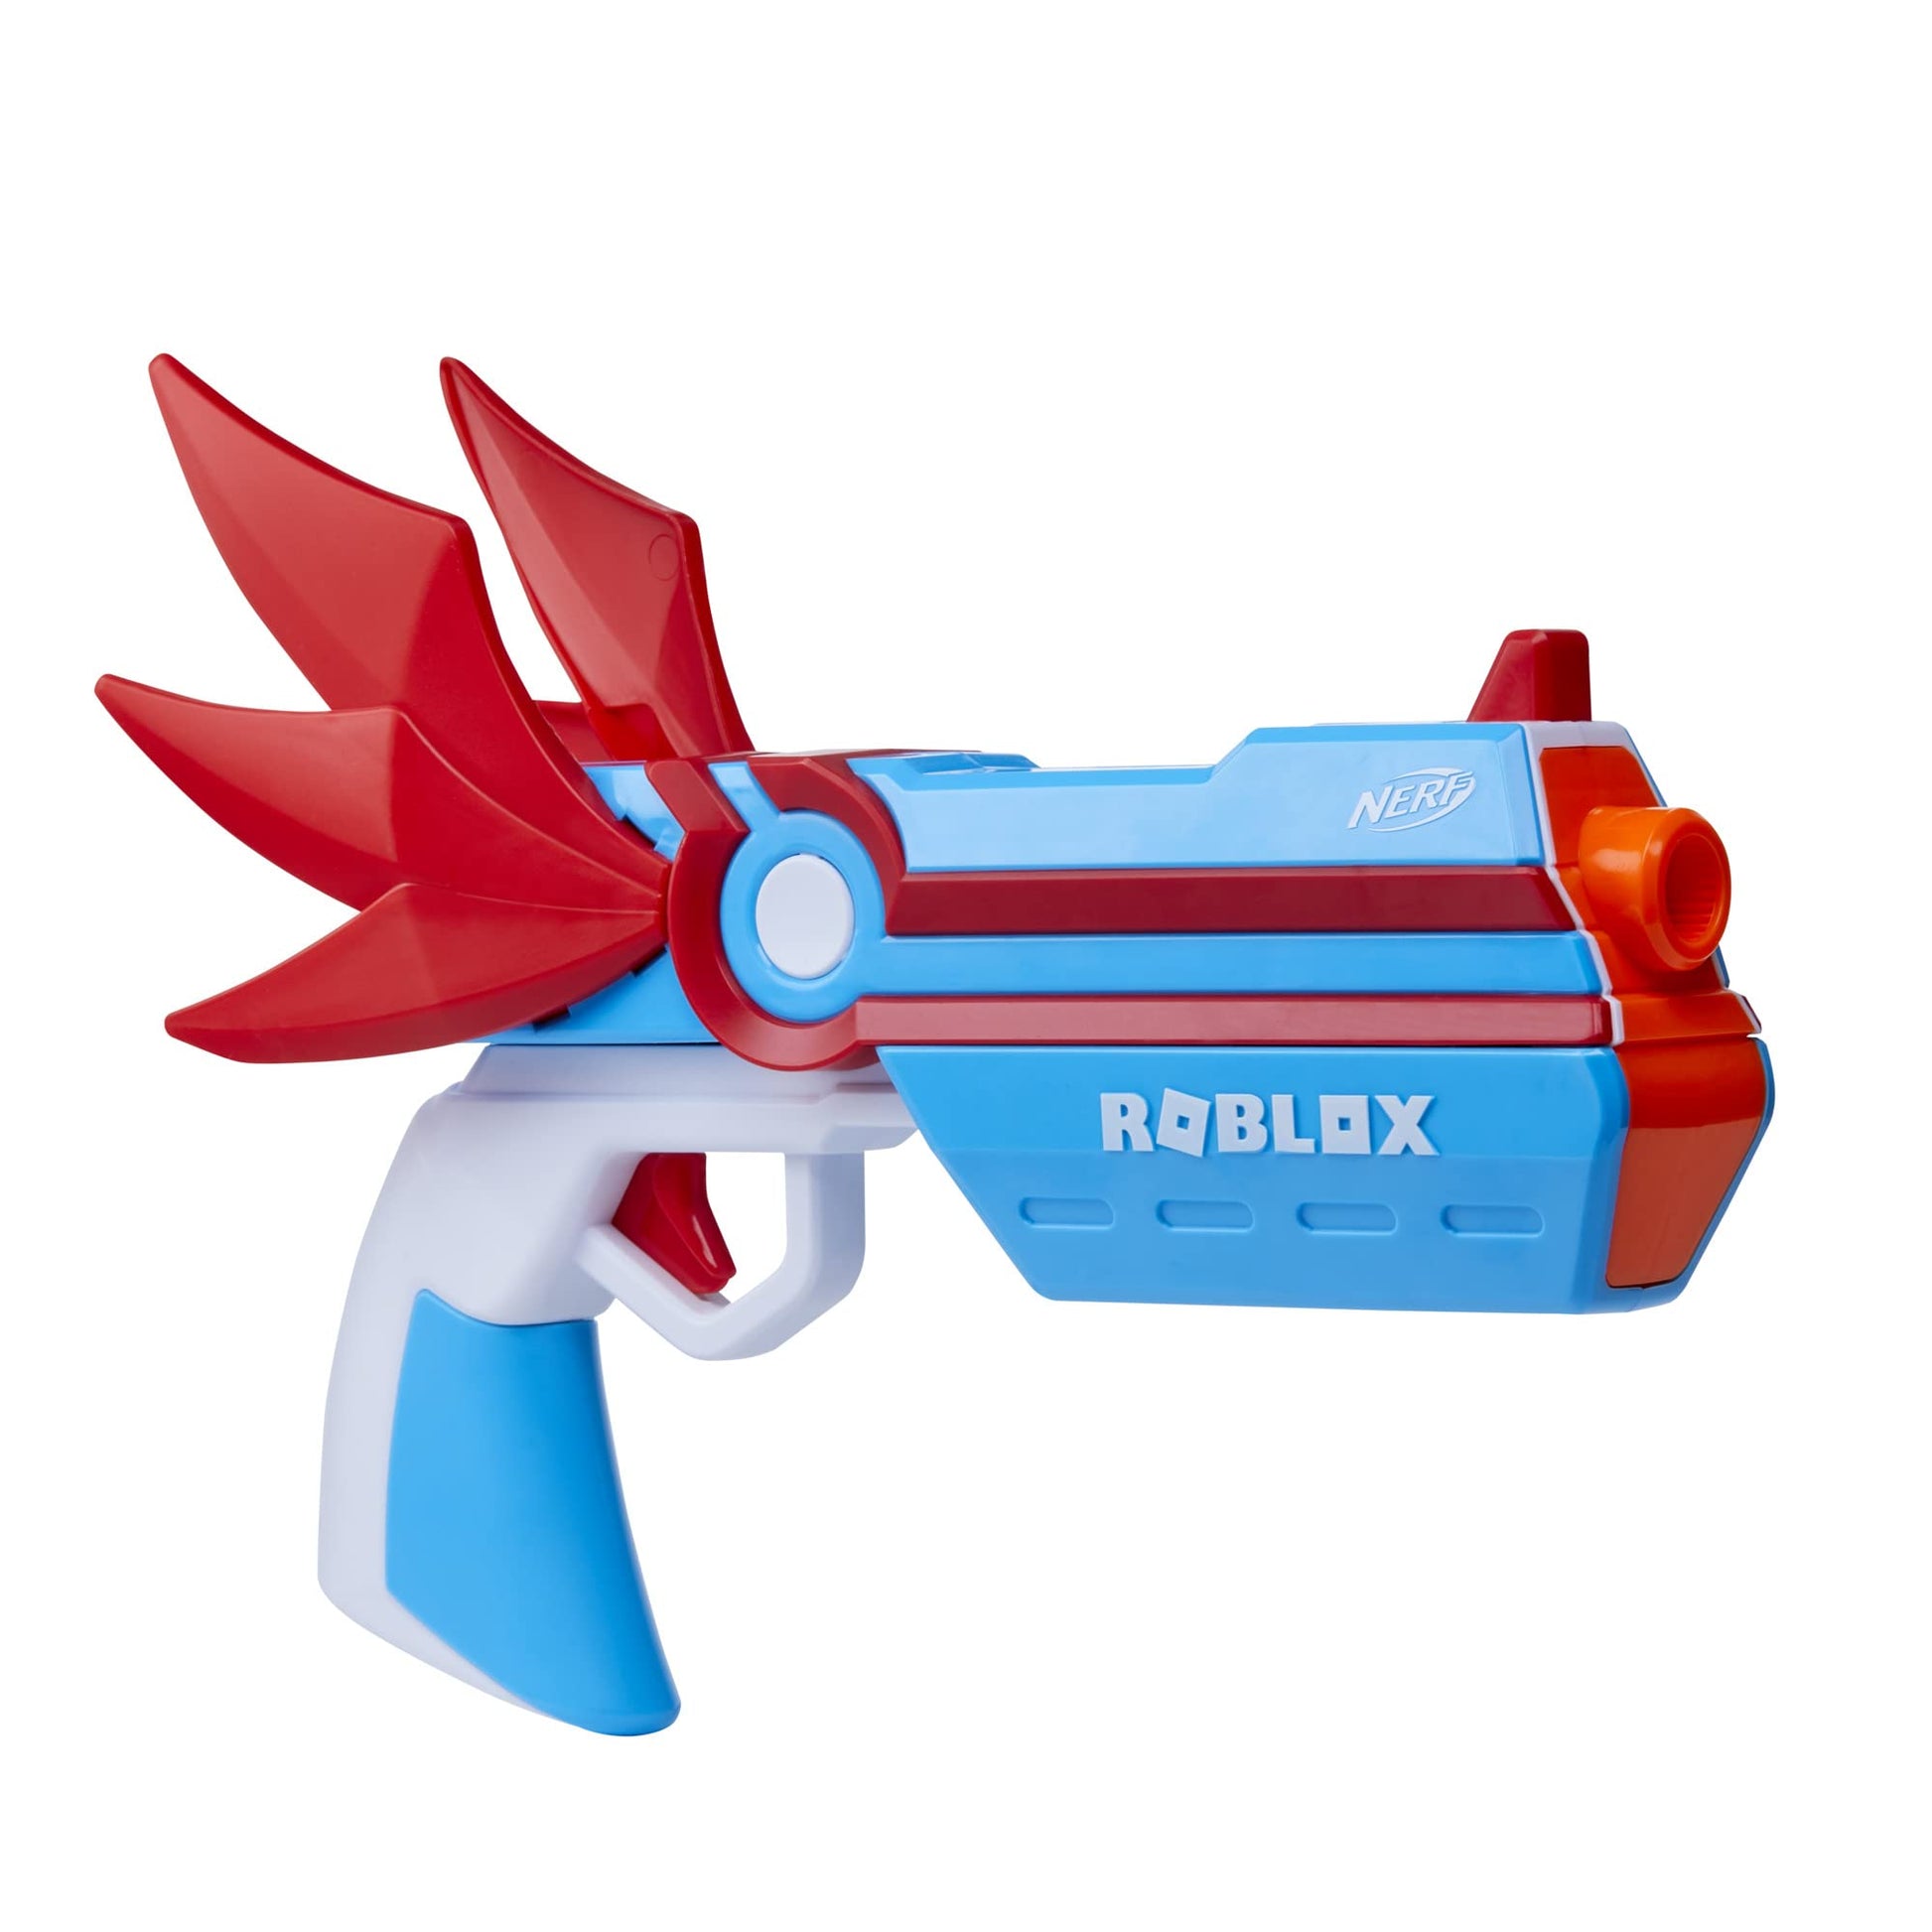 mm2 weapons for 1000 robux｜TikTok Search